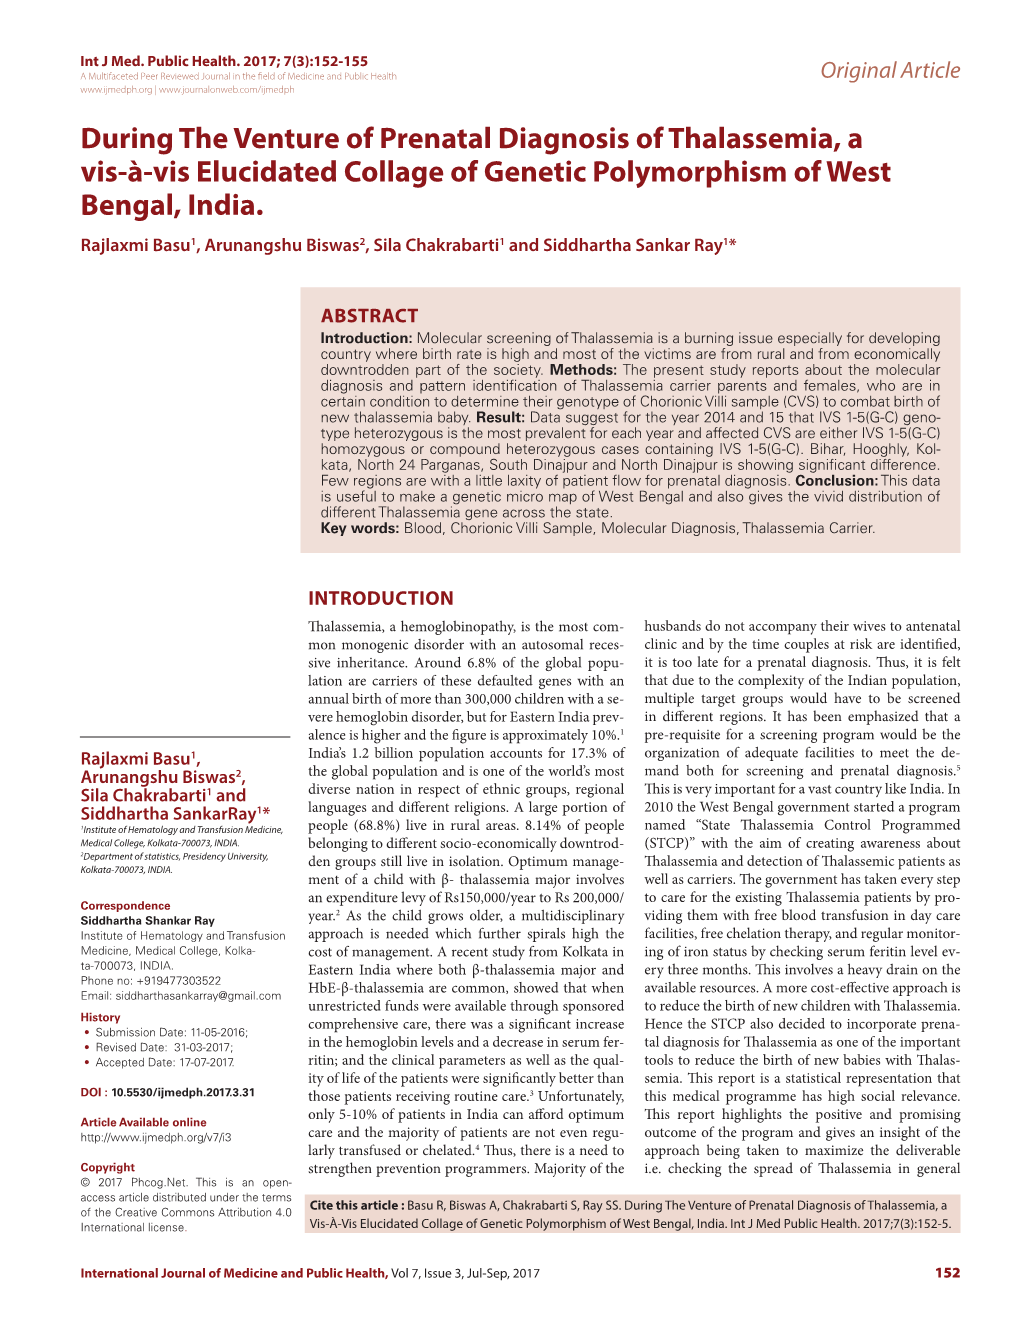 During the Venture of Prenatal Diagnosis of Thalassemia, a Vis-À-Vis Elucidated Collage of Genetic Polymorphism of West Bengal, India